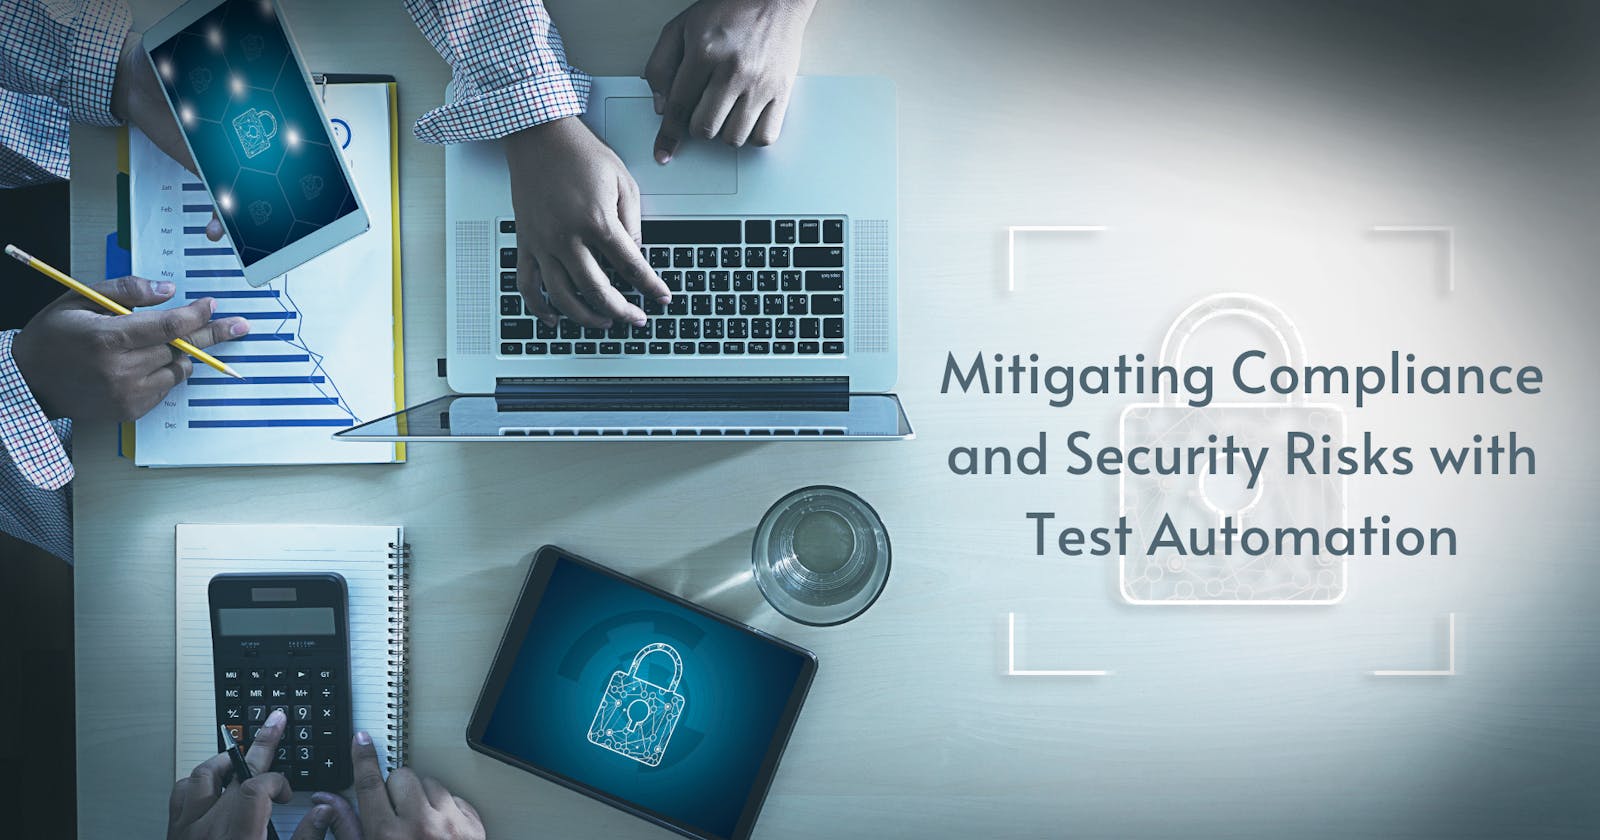 Mitigating Compliance and Security Risks with Test Automation